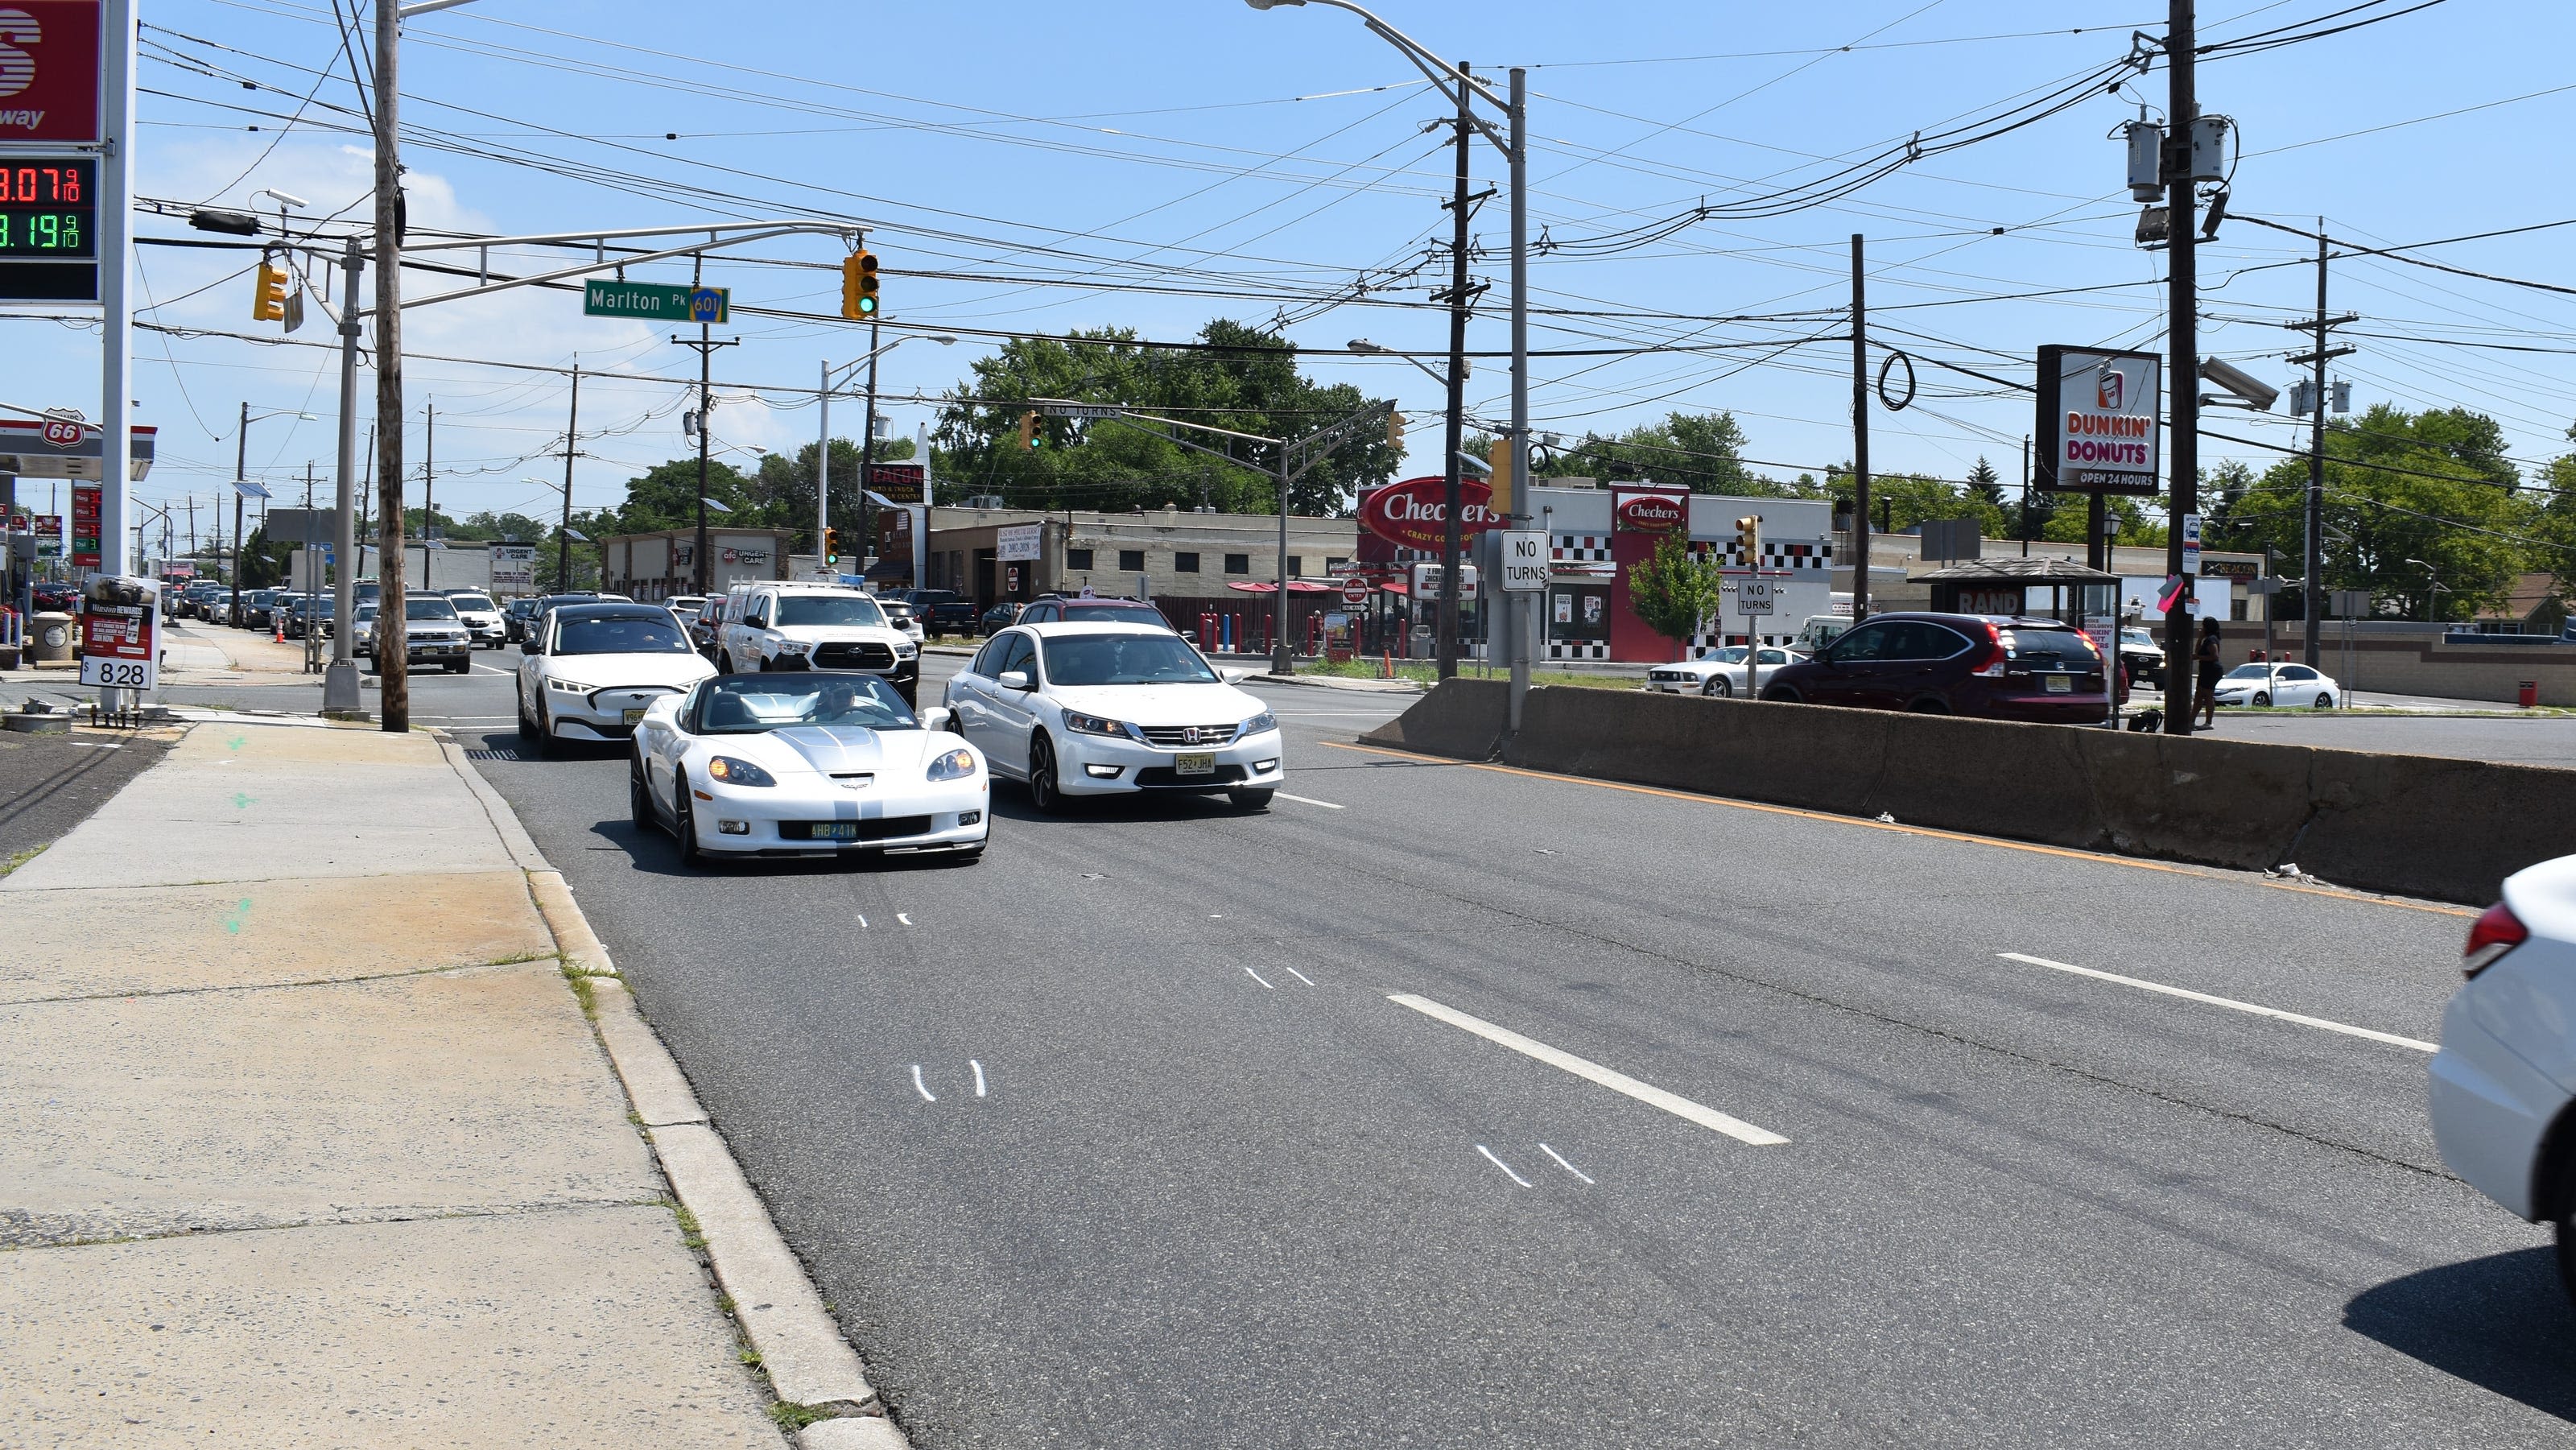 Pennsauken man charged over fatal crash on Route 130; state plans improvements